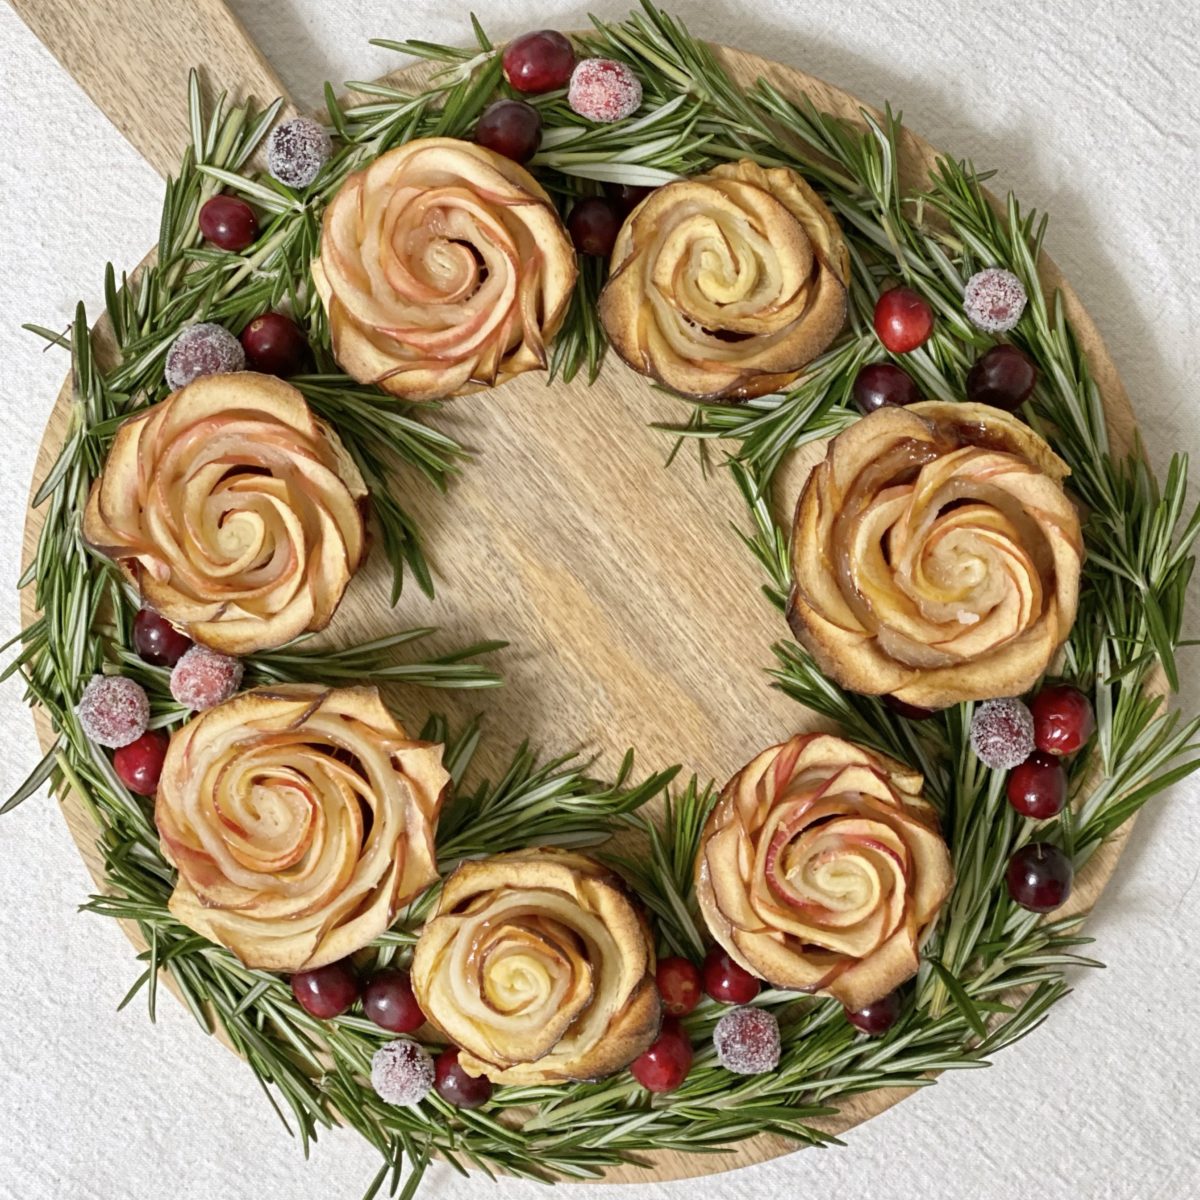 Baked apple roses on a round wood cutting board with rosemary and cranberries around them to make them look like a wreath.